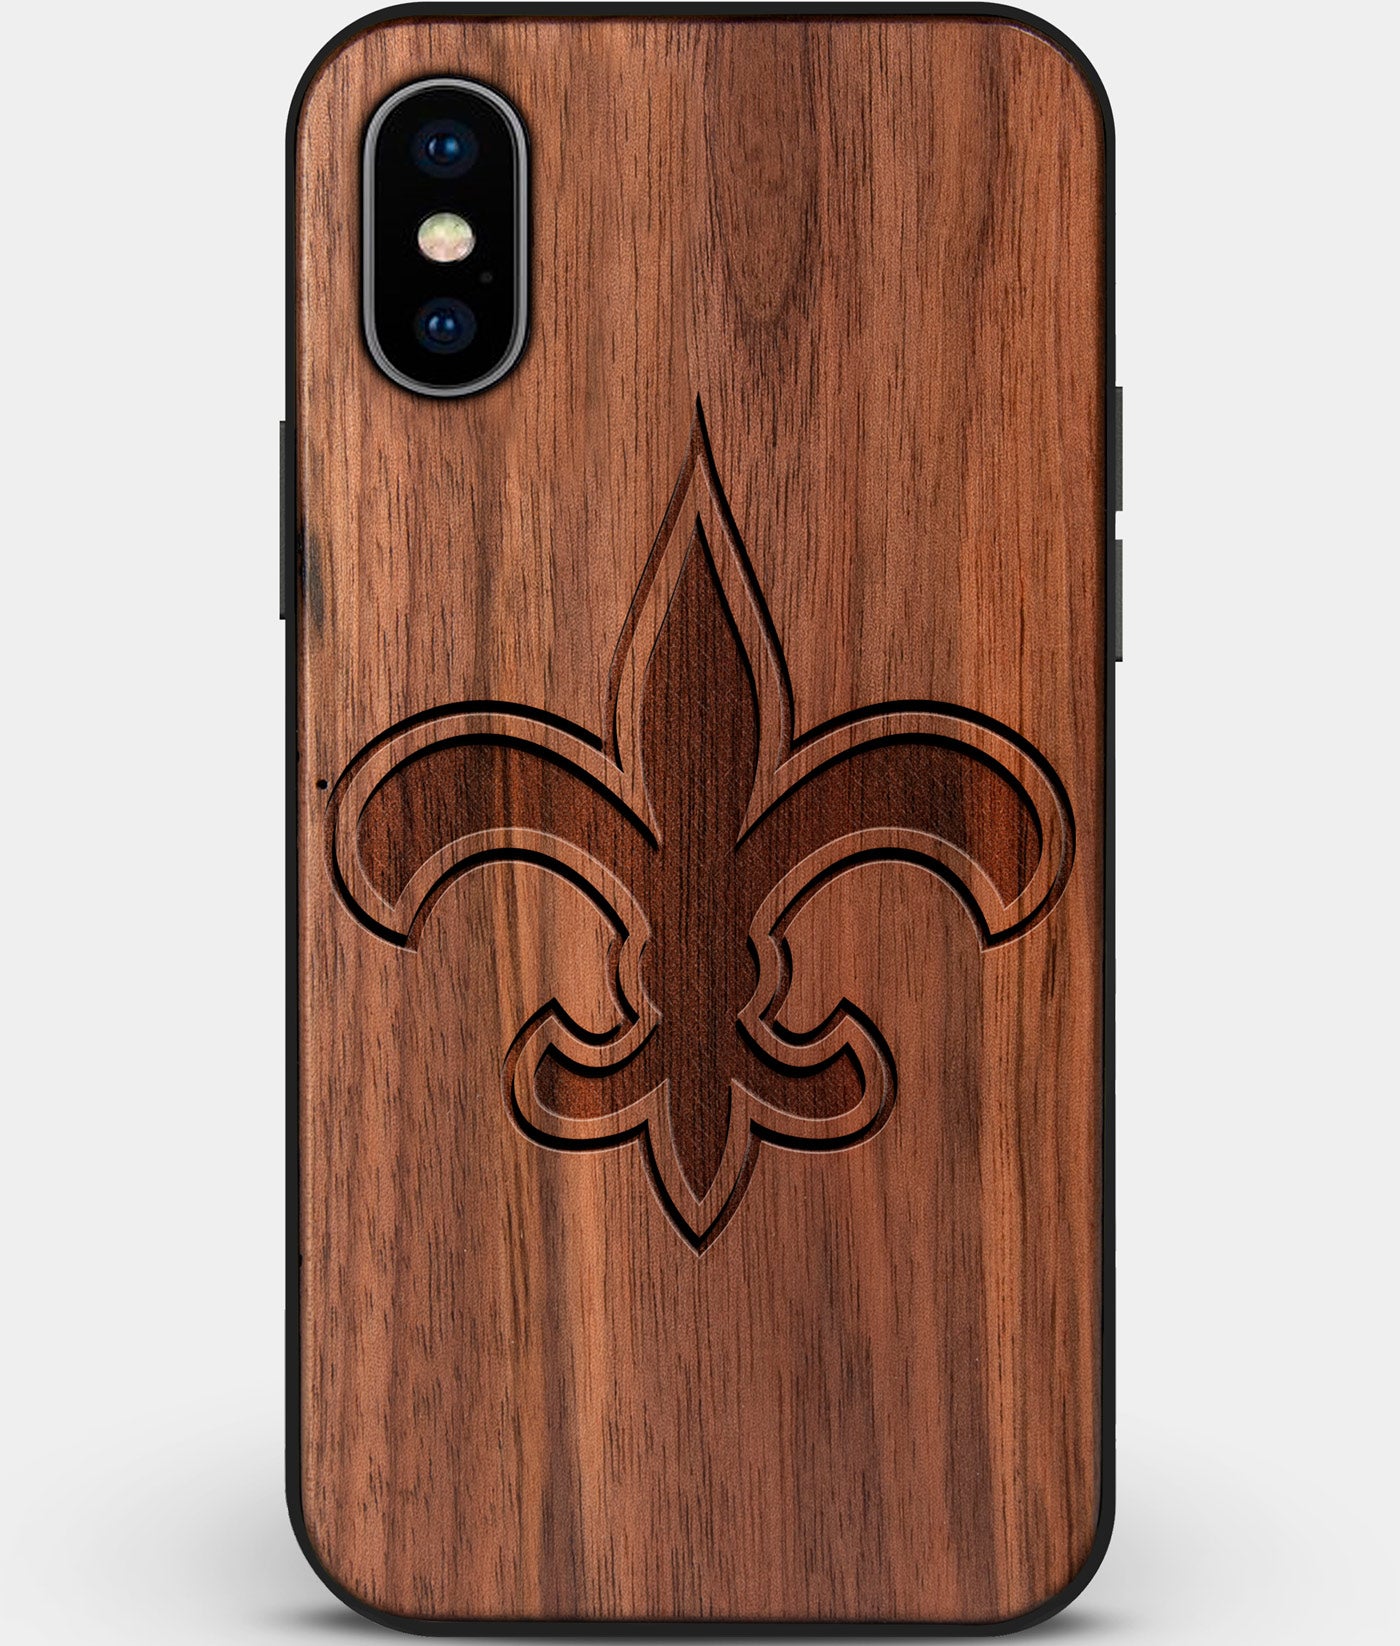 Custom Carved Wood New Orleans Saints iPhone X/XS Case | Personalized Walnut Wood New Orleans Saints Cover, Birthday Gift, Gifts For Him, Monogrammed Gift For Fan | by Engraved In Nature